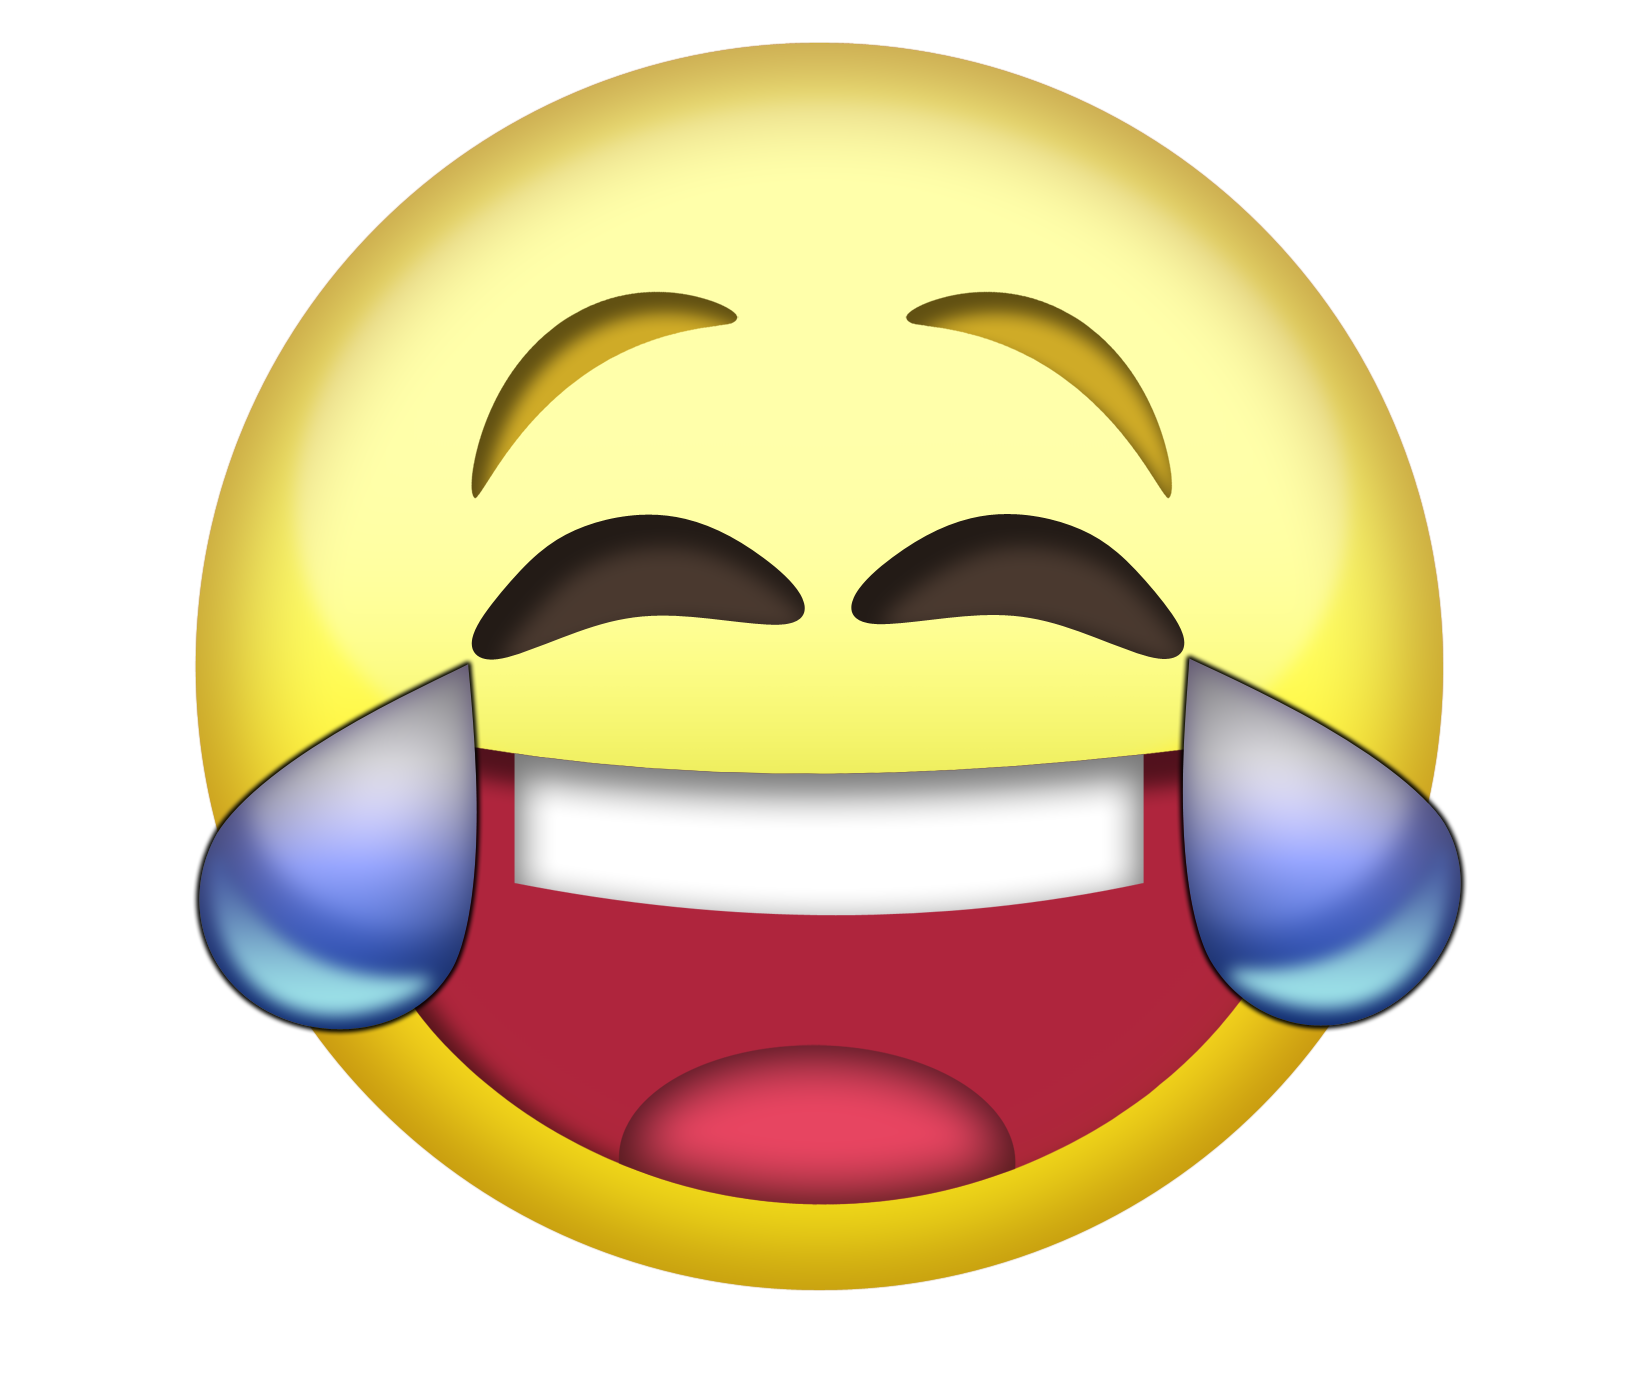 Download PNG image - Emoji Head PNG Picture 